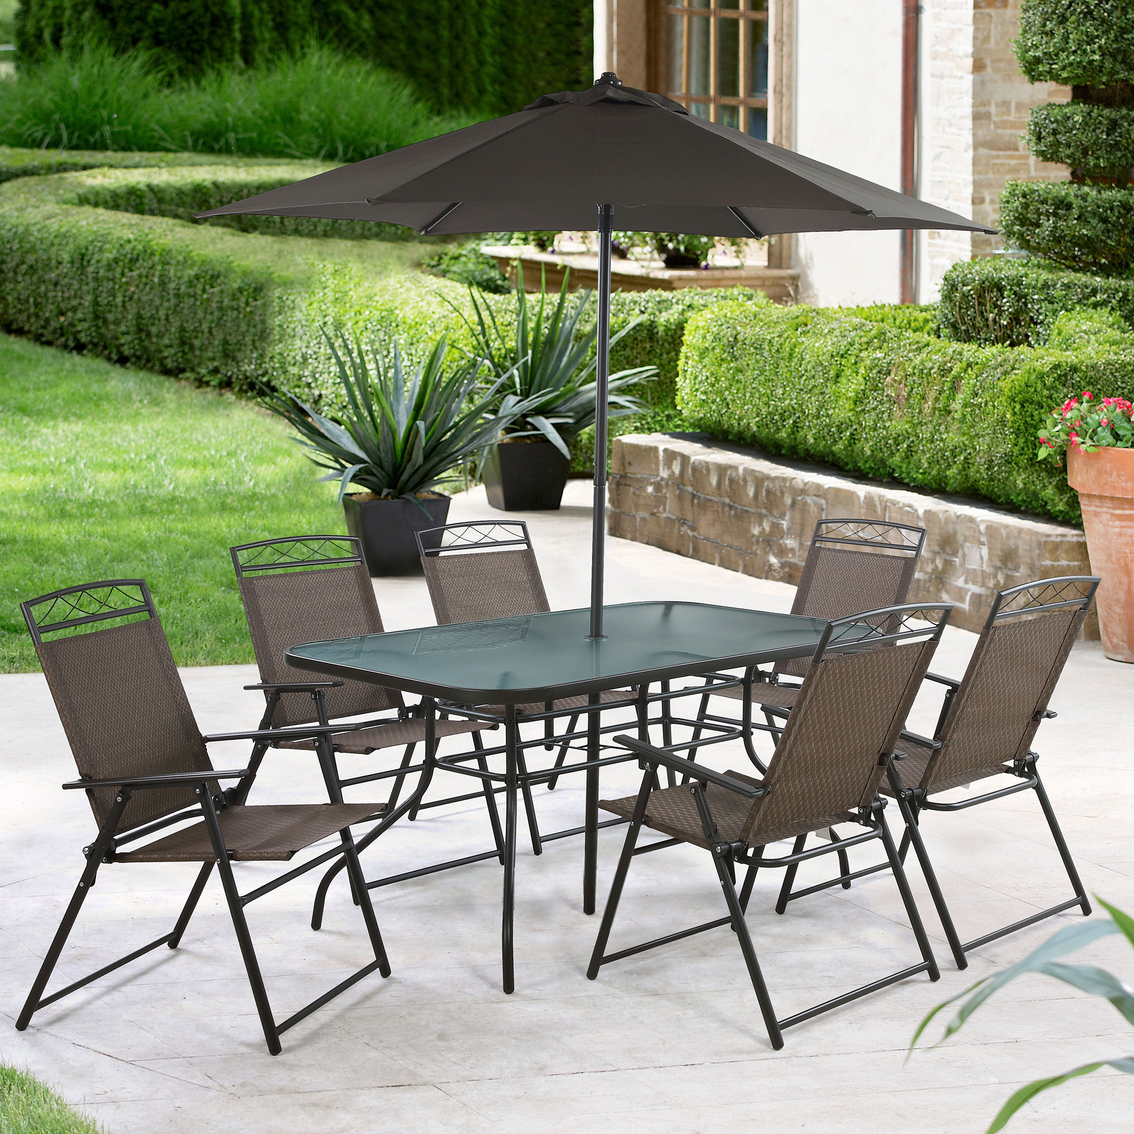 Courtyard Creations Arrowhead 8 Pc Outdoor Dining Set with regard to sizing 1134 X 1134